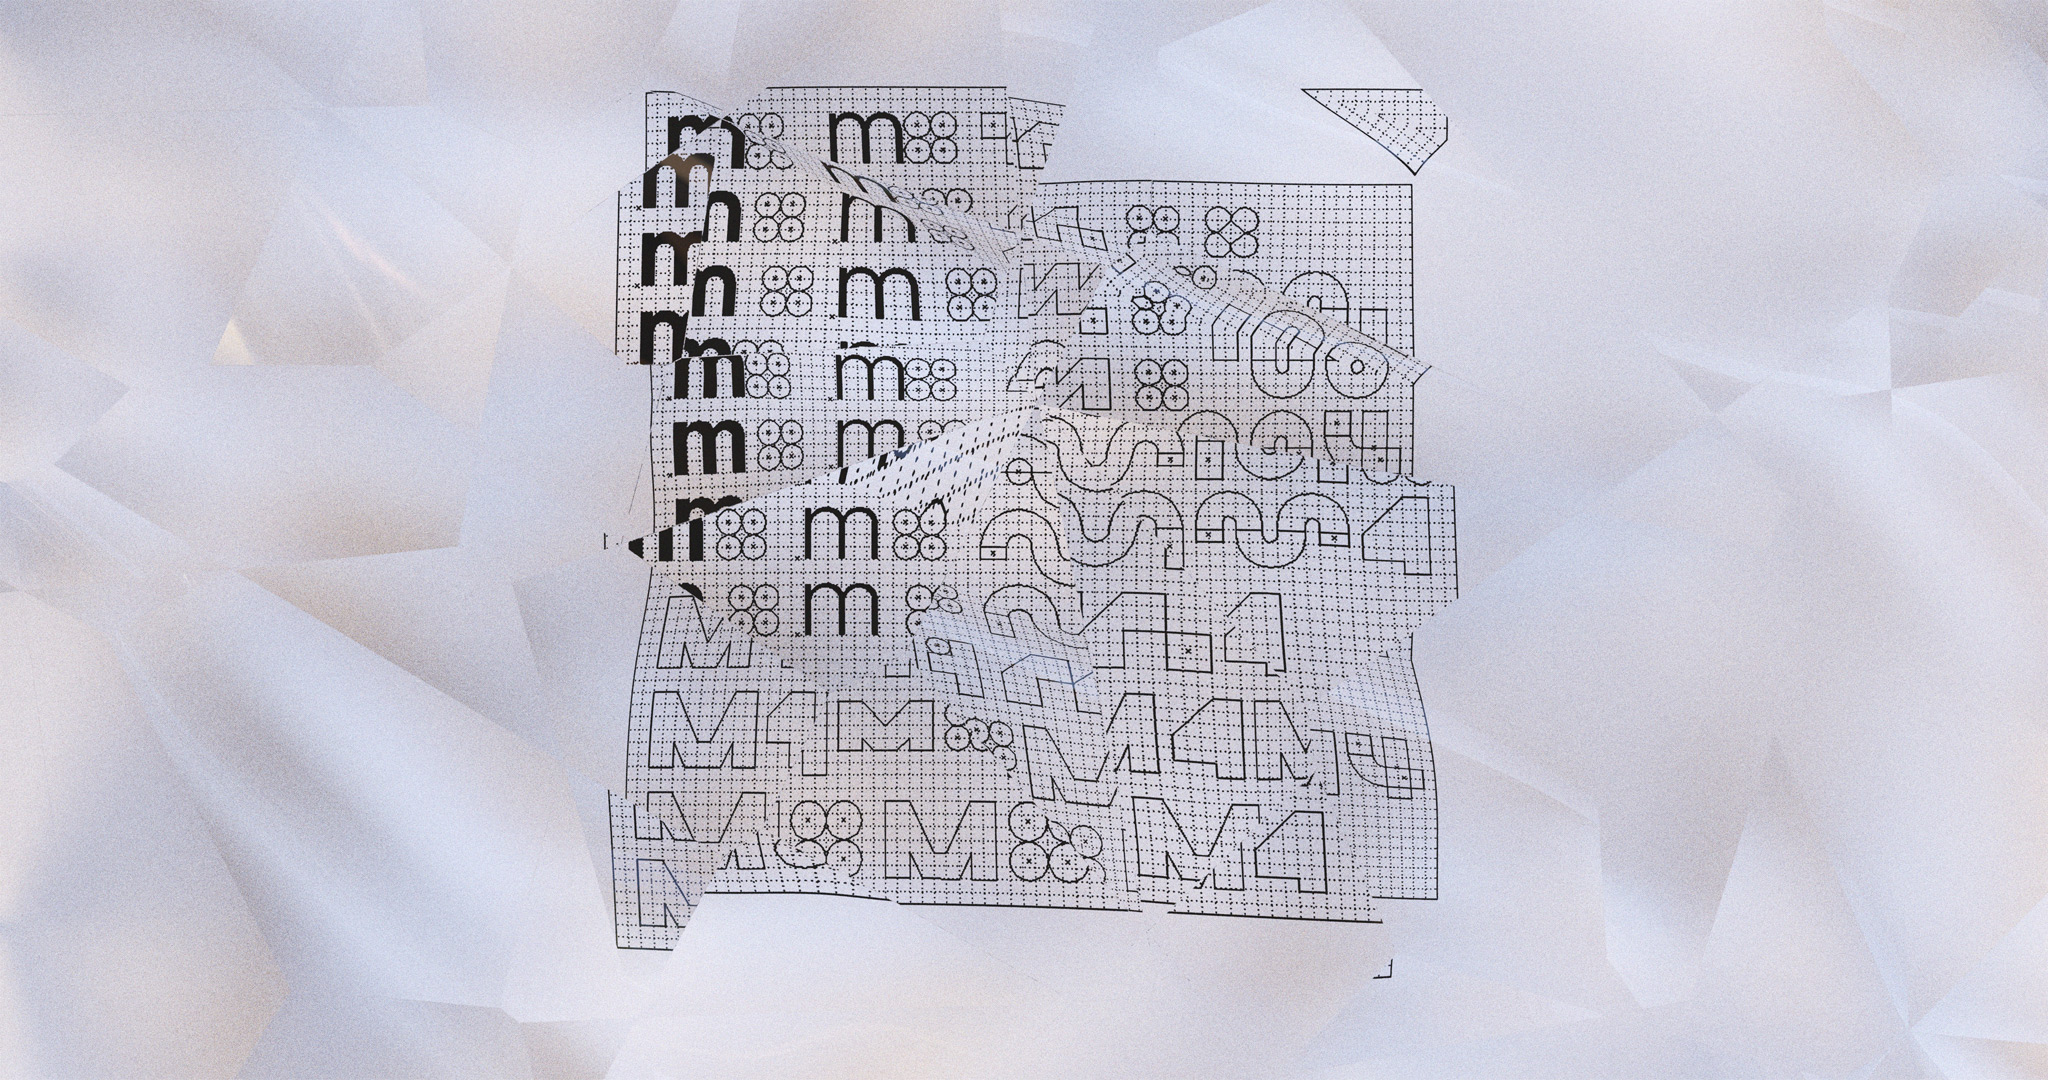 3D render of logotype prototypes produced on a grid, overlayed by shattered glass refracting the image.